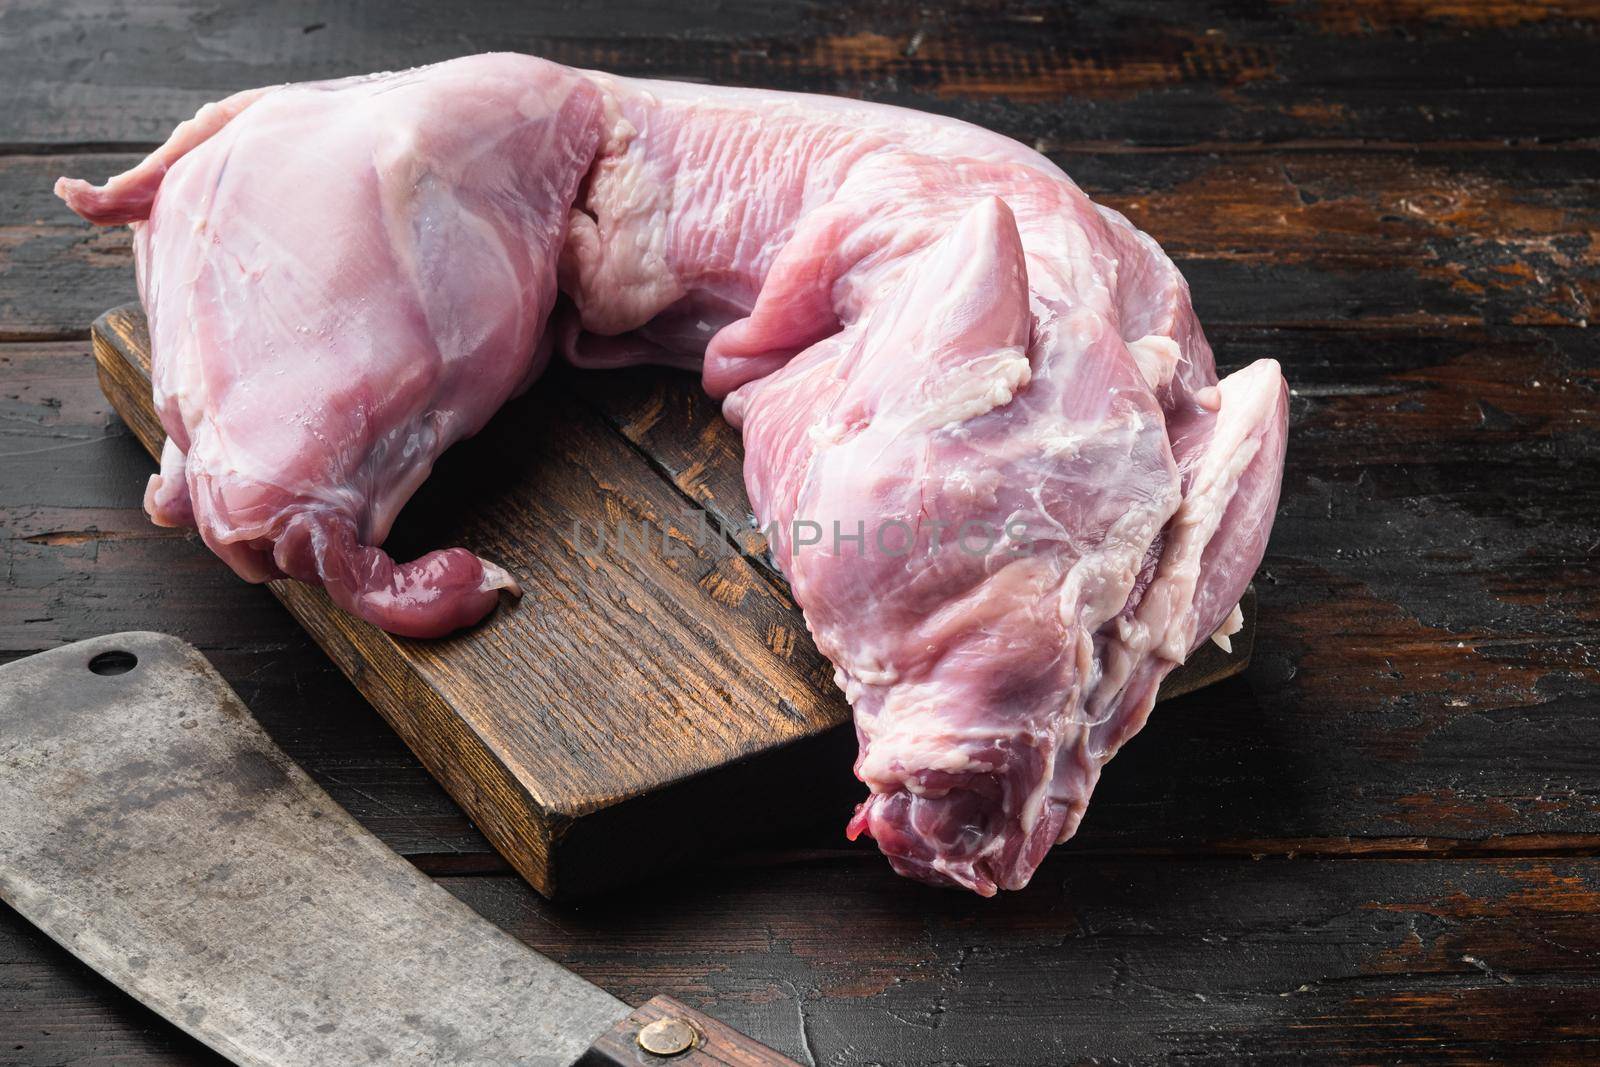 Raw fresh whole rabbit carcass set, and old butcher cleaver knife, on old dark wooden table